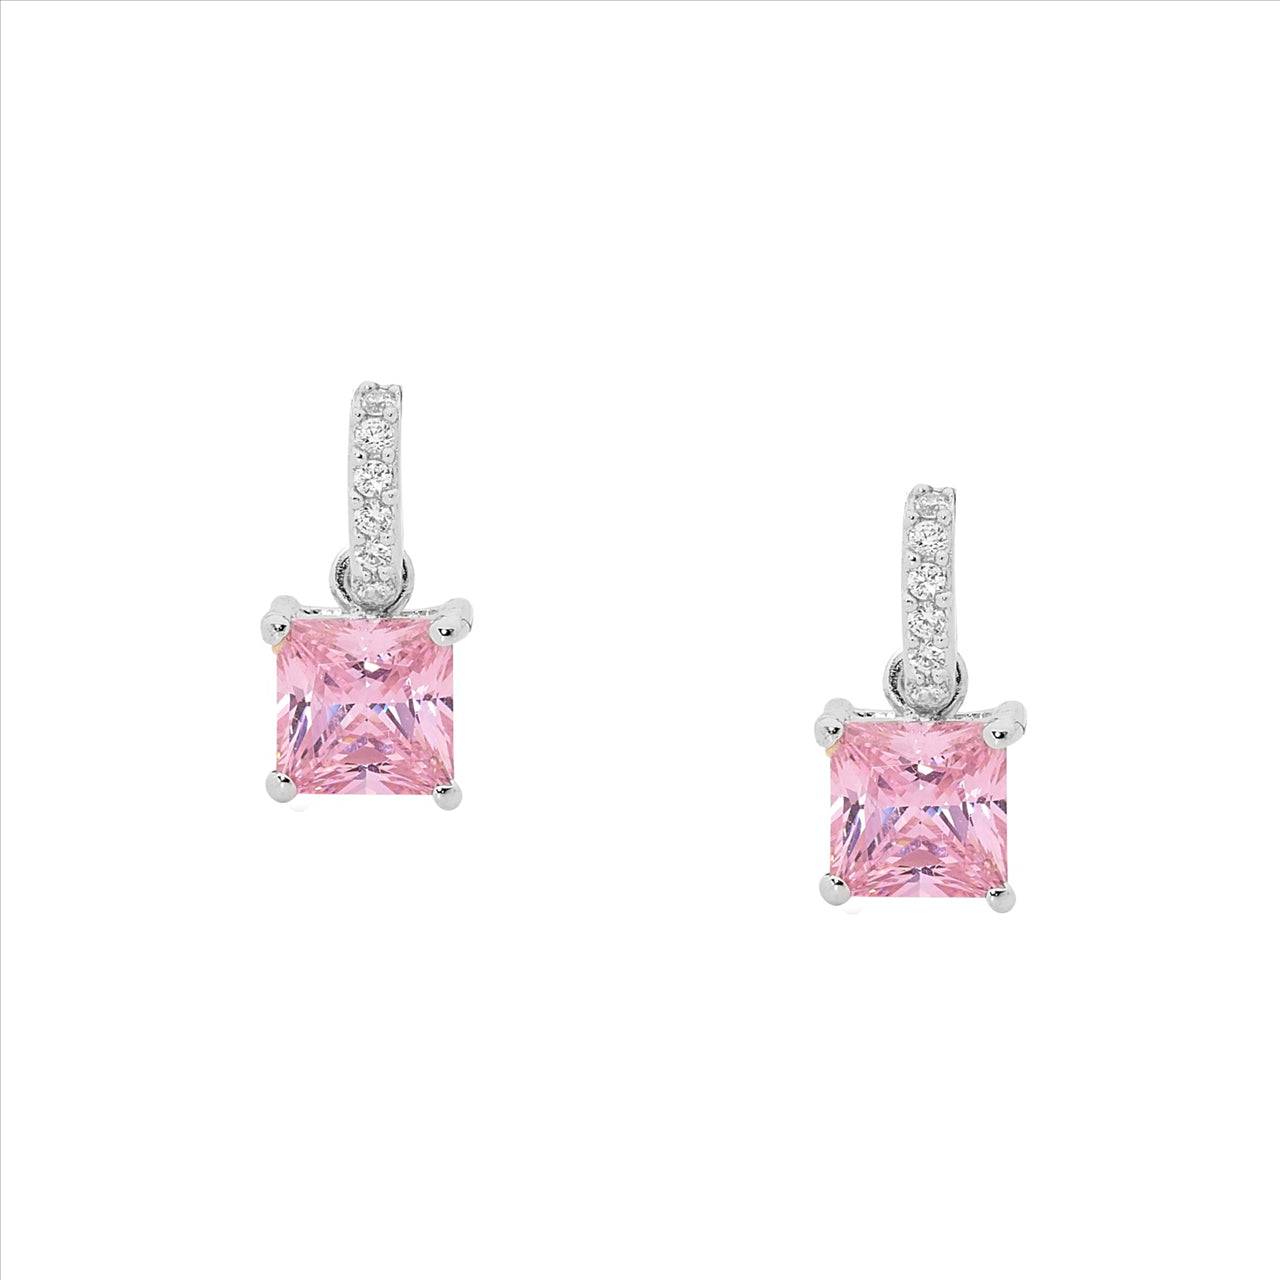 Sterling Silver Drop Earrings with Princess Cut Pink Cubic Zirconias and White CZ Surround